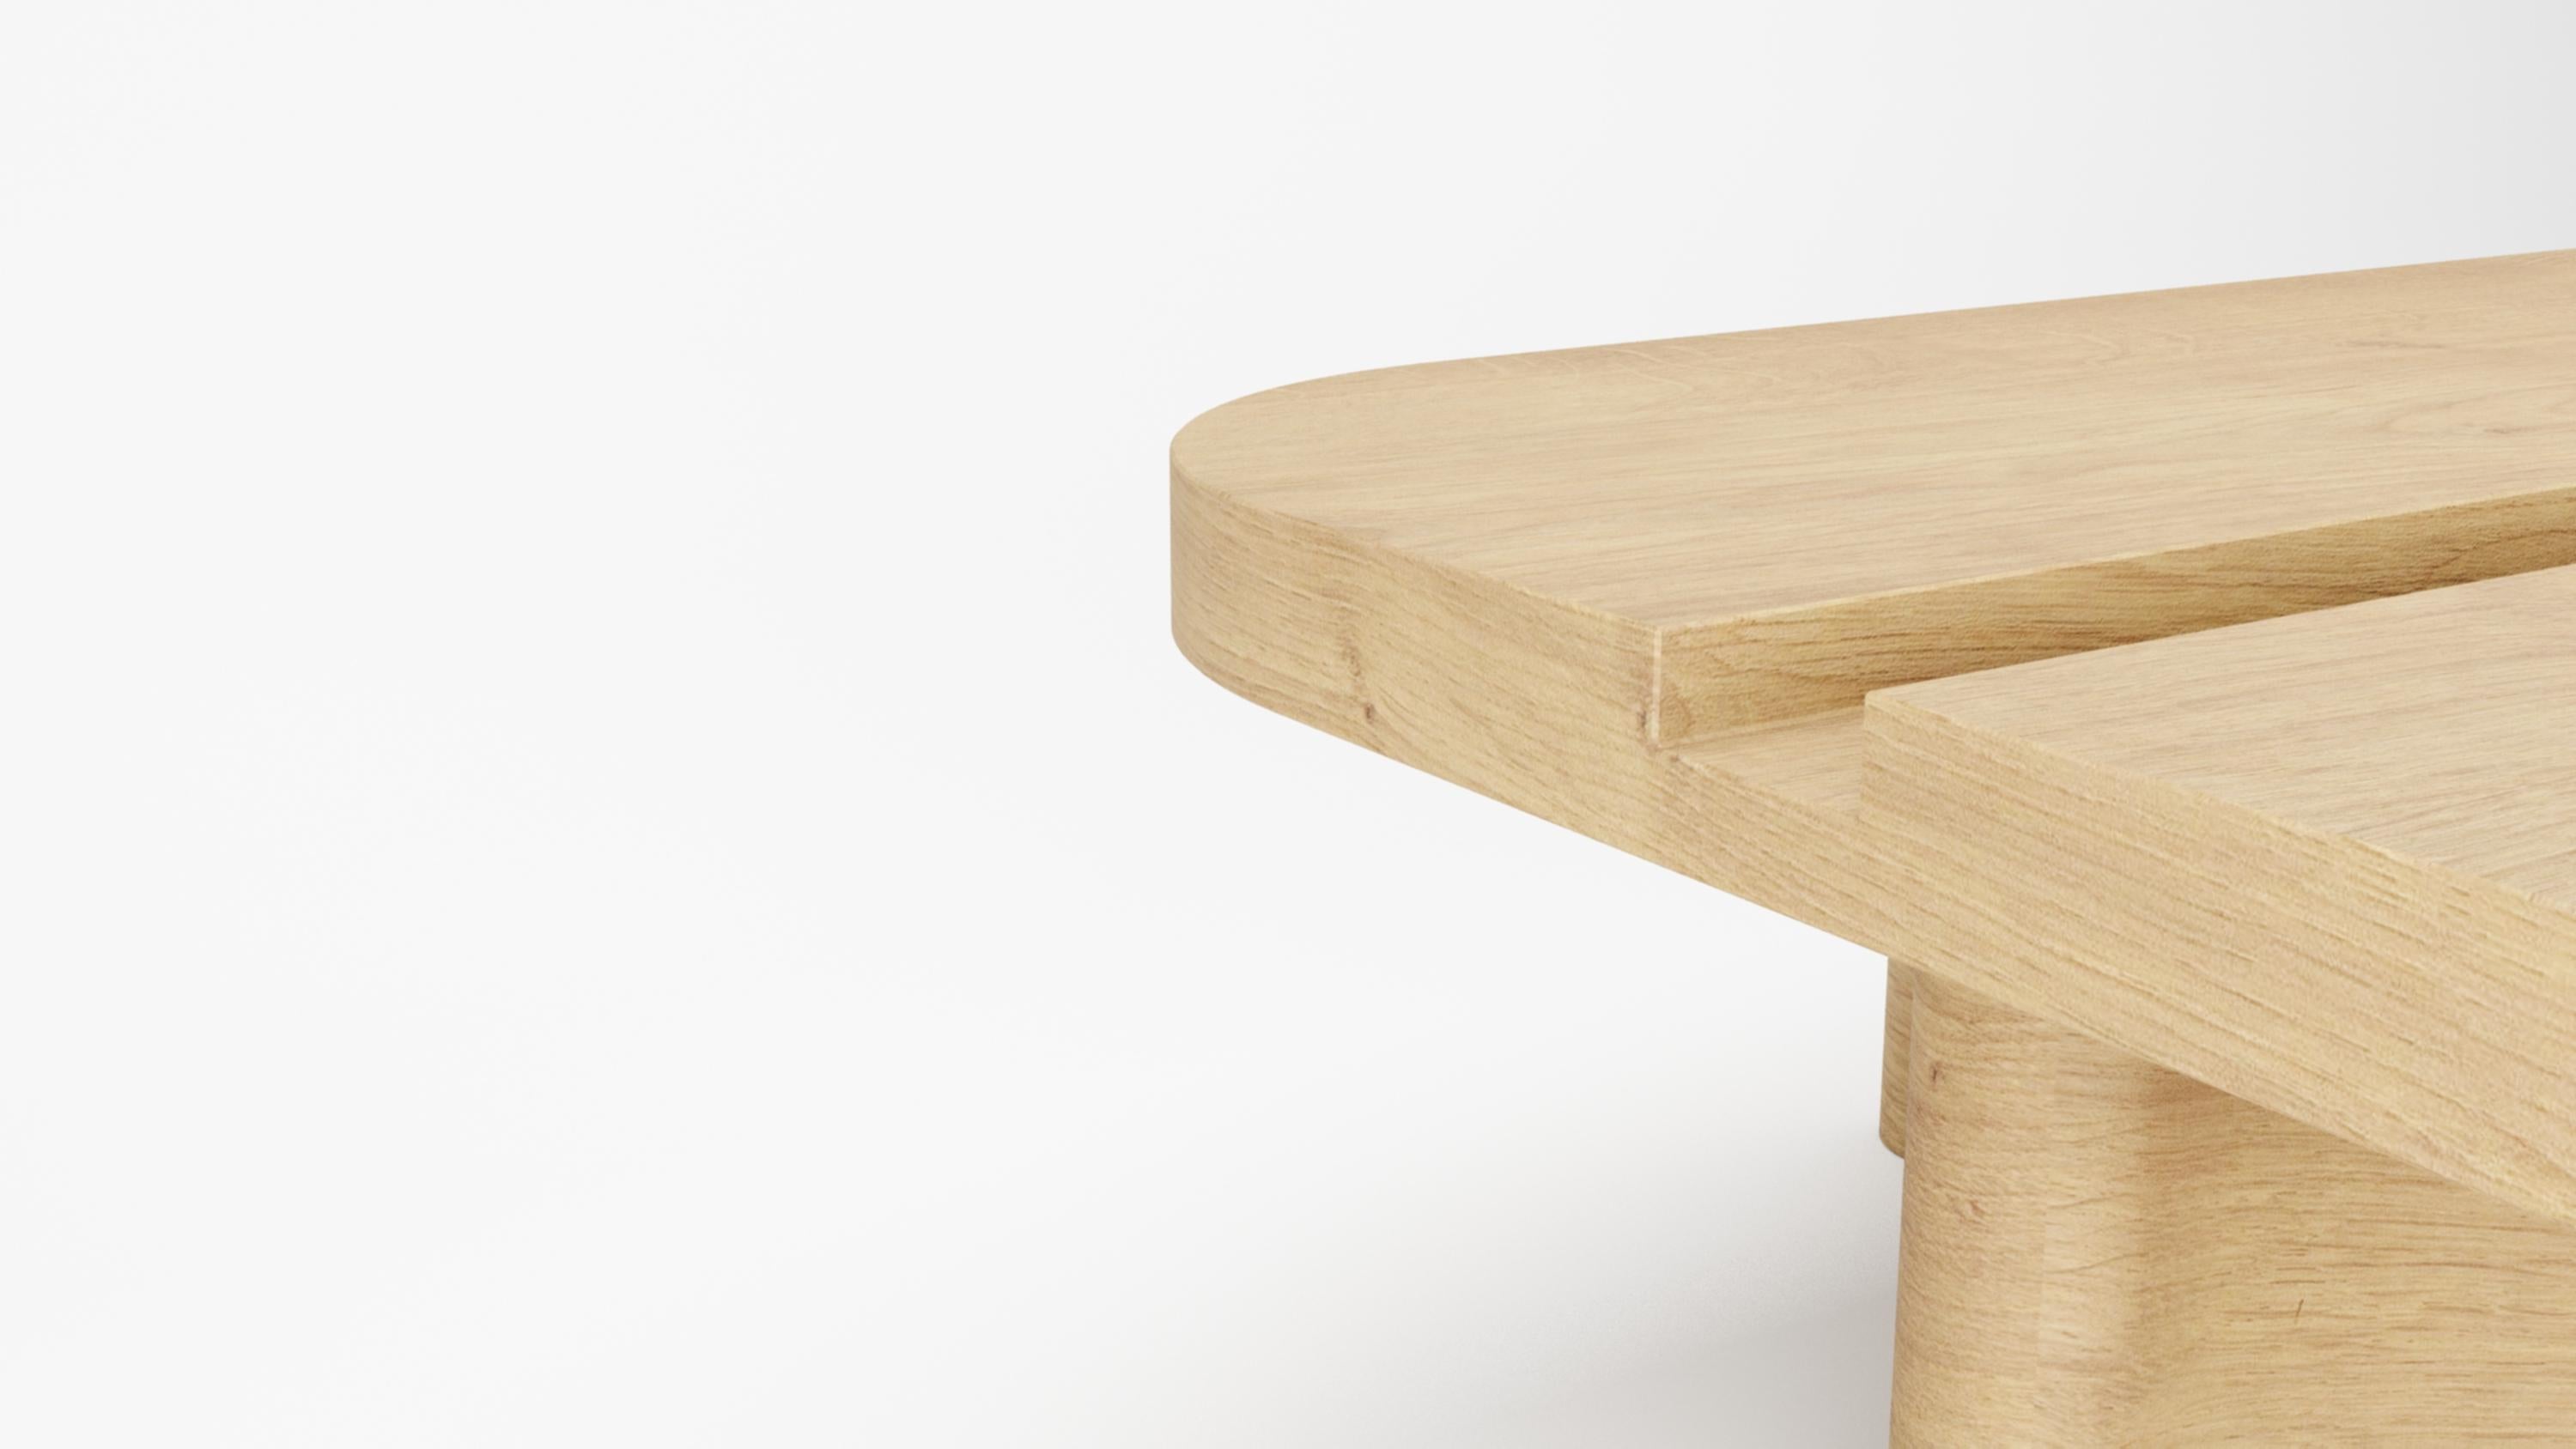 Collector - Designed by Studio Rig Riviera Center Table Natural Oak

Collector brand was born and Portugal and aims to be part of daily life by fusing furniture to home routines and lifestyles. The company designs its pieces with the intention to